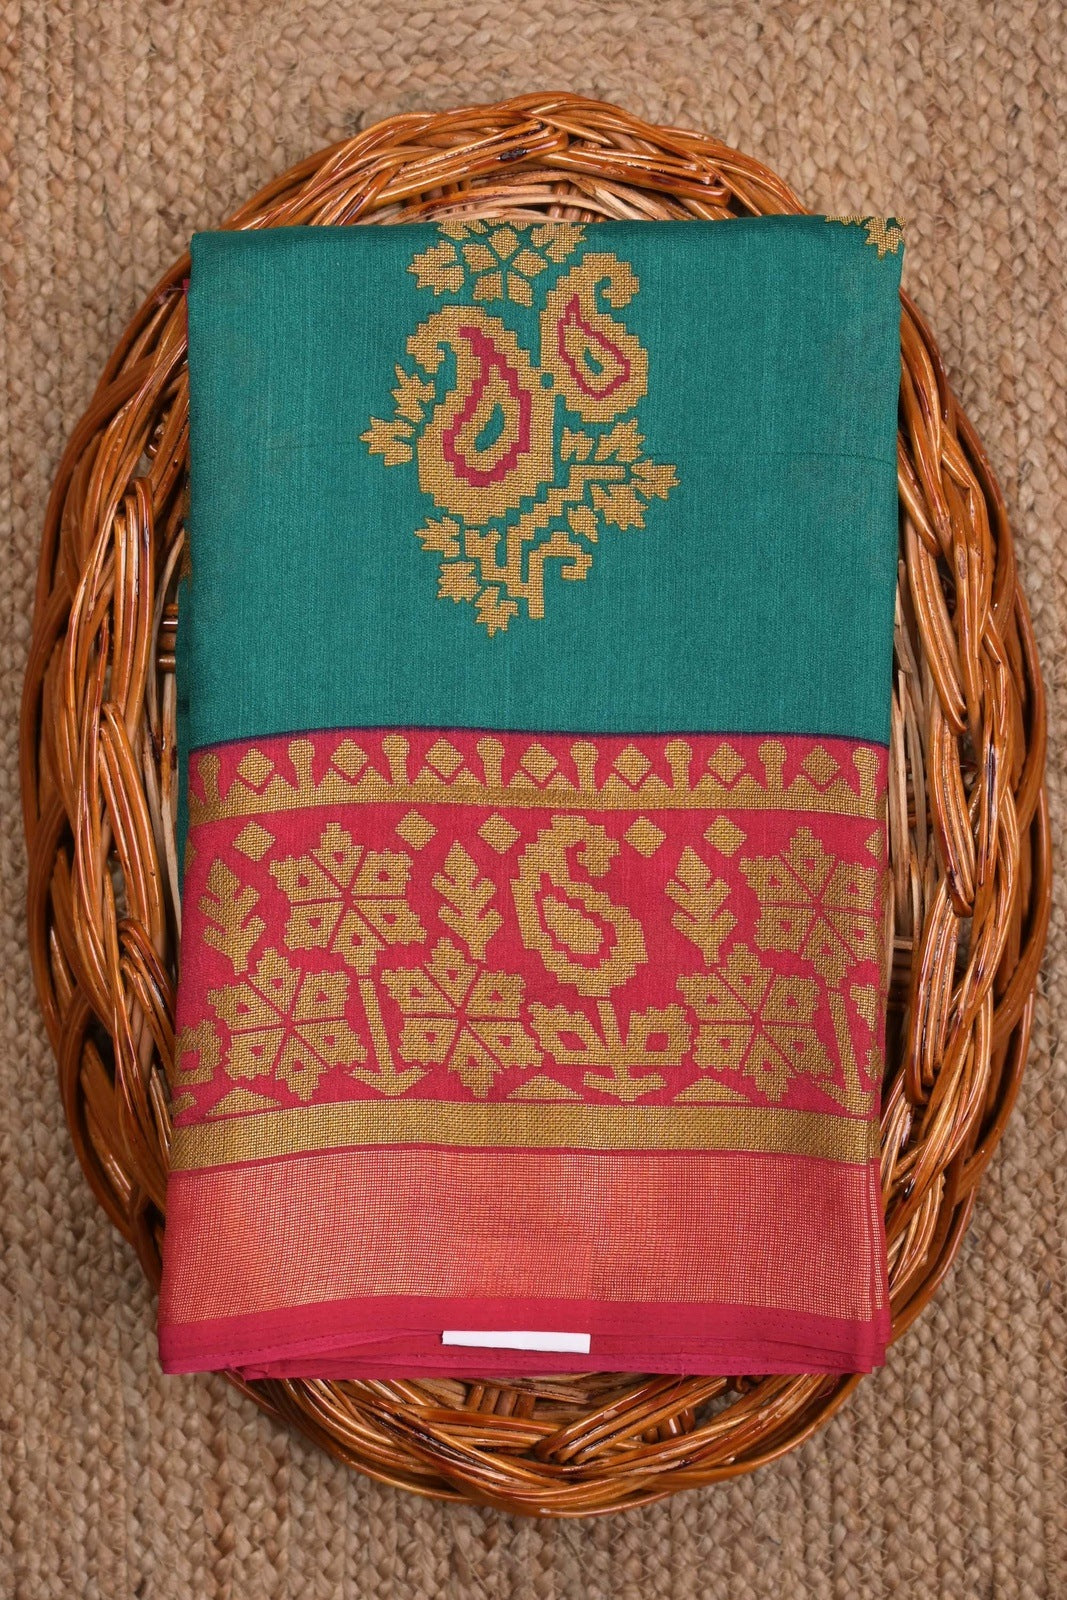 Soft jute saree green and red color allover prints with contrast border and brocade blouse